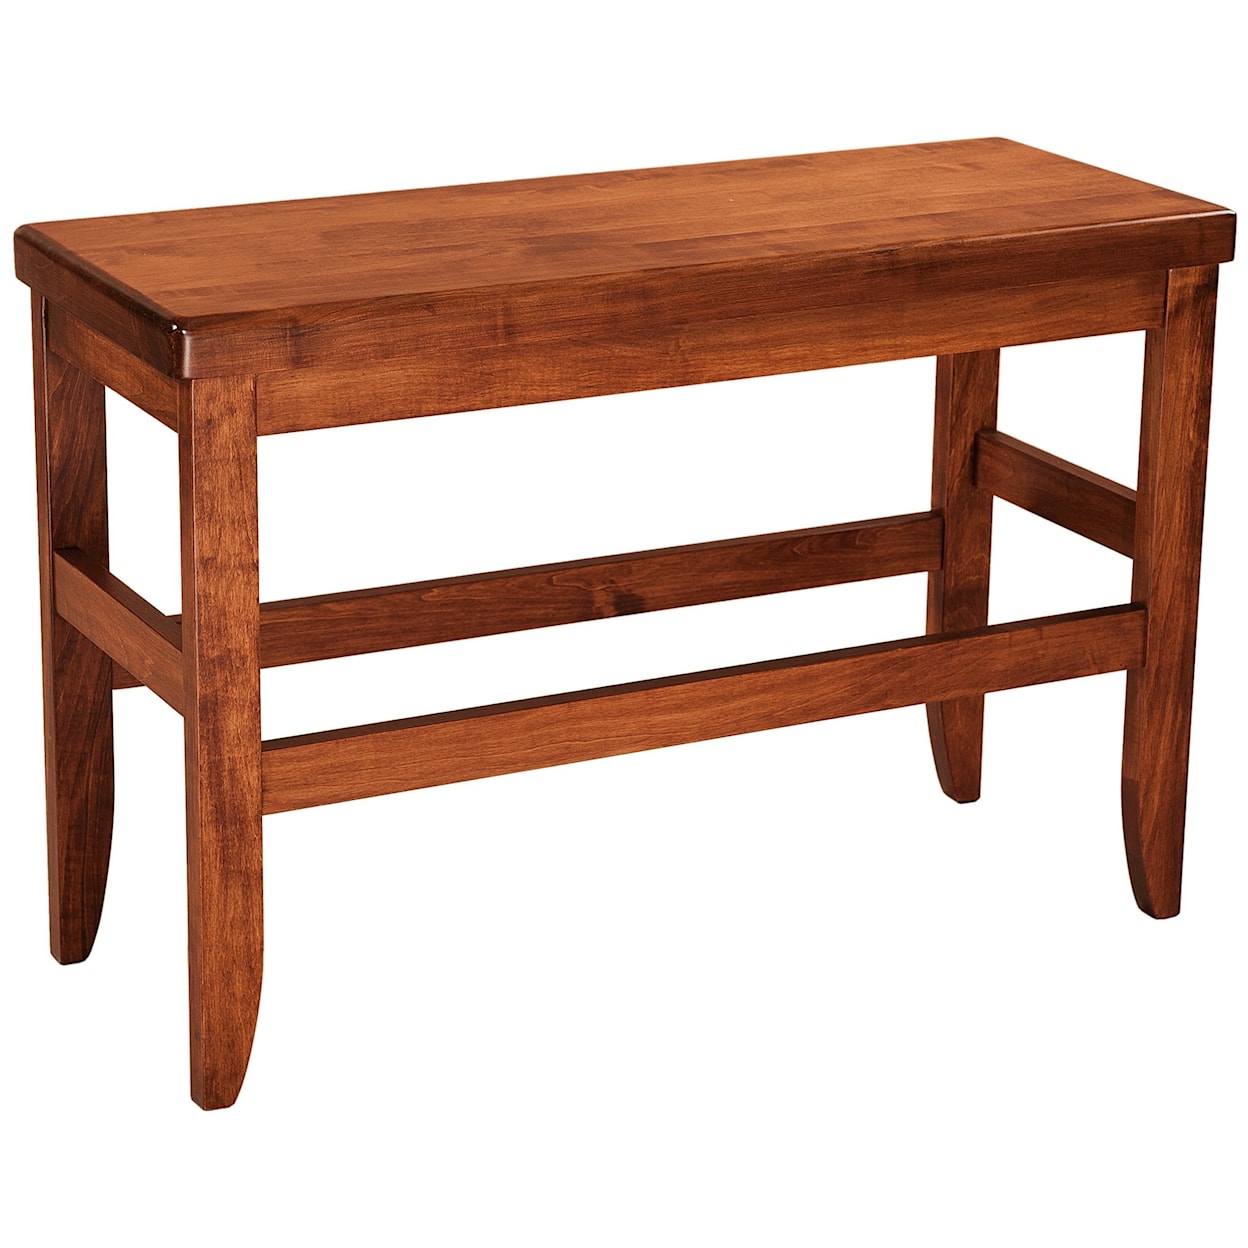 F&N Woodworking Clifton Bench 30"h x 72"w - Wood Seat